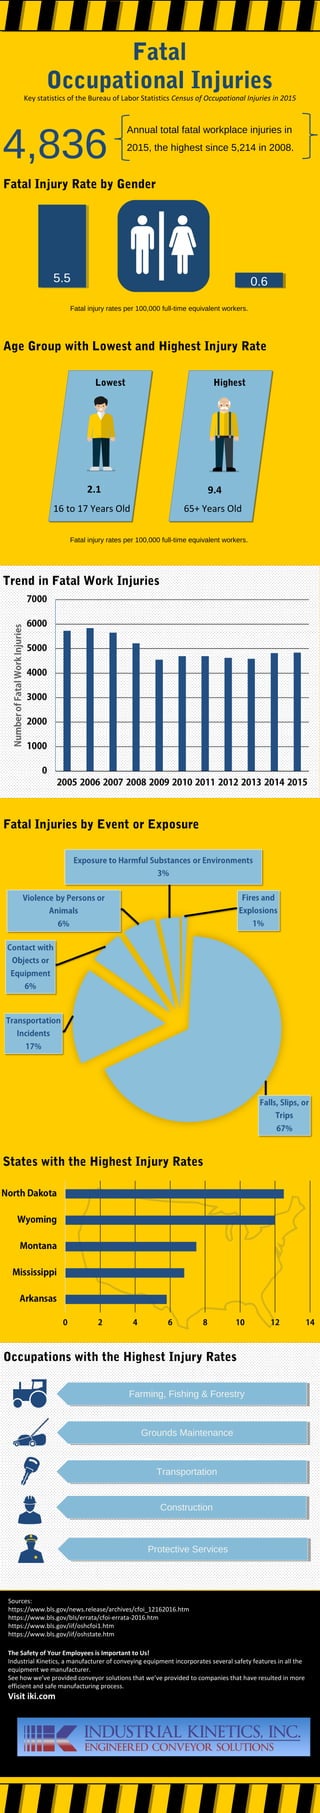 Fatal
Occupational Injuries
Key statistics of the Bureau of Labor Statistics Census of Occupational Injuries in 2015
The Safety of Your Employees is Important to Us!
Industrial Kinetics, a manufacturer of conveying equipment incorporates several safety features in all the
equipment we manufacturer.
See how we’ve provided conveyor solutions that we’ve provided to companies that have resulted in more
efficient and safe manufacturing process.
Visit iki.com
4,836
Annual total fatal workplace injuries in
2015, the highest since 5,214 in 2008.
Trend in Fatal Work Injuries
Fatal injury rates per 100,000 full-time equivalent workers.
5.5 0.6
Fatal Injury Rate by Gender
Fatal Injuries by Event or Exposure
Occupations with the Highest Injury Rates
Farming, Fishing & Forestry
Construction
Transportation
Grounds Maintenance
Protective Services
States with the Highest Injury Rates
Age Group with Lowest and Highest Injury Rate
Lowest Highest
2.1
16 to 17 Years Old 65+ Years Old
9.4
Fatal injury rates per 100,000 full-time equivalent workers.
Sources:
https://www.bls.gov/news.release/archives/cfoi_12162016.htm
https://www.bls.gov/bls/errata/cfoi-errata-2016.htm
https://www.bls.gov/iif/oshcfoi1.htm
https://www.bls.gov/iif/oshstate.htm
 